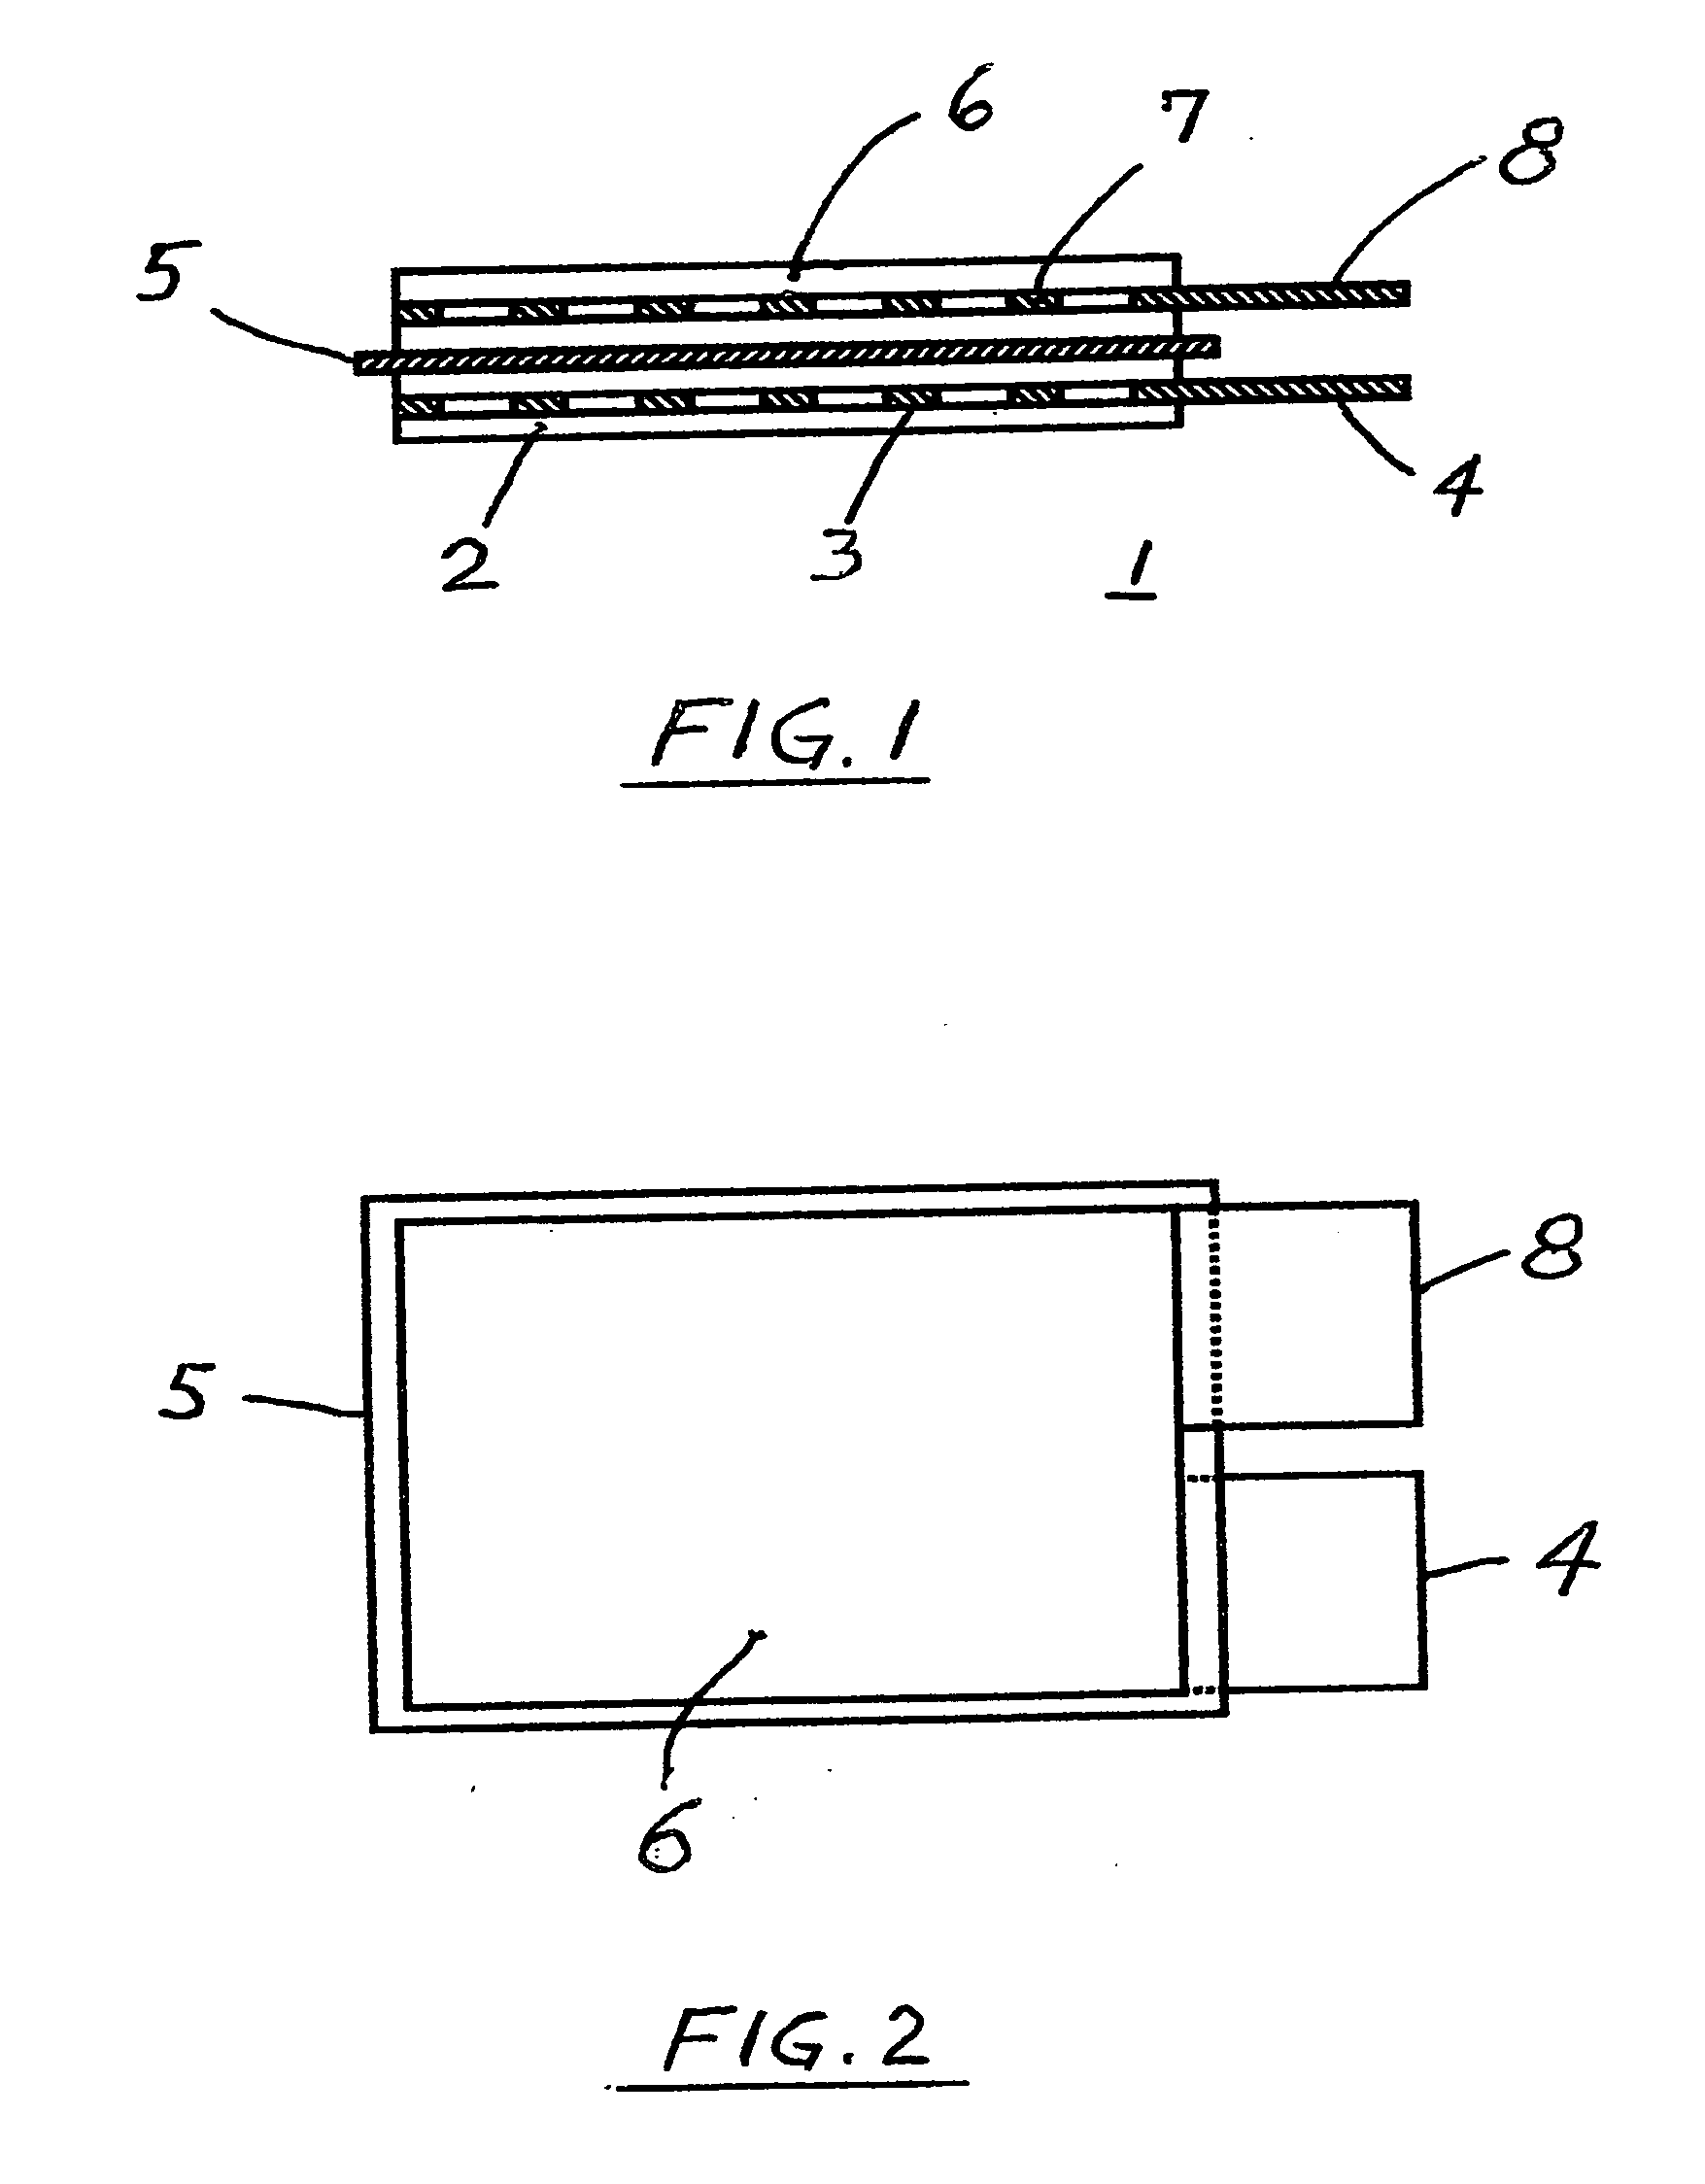 Method of automated prismatic electrochemical cells production and method of the cell assembly and construction